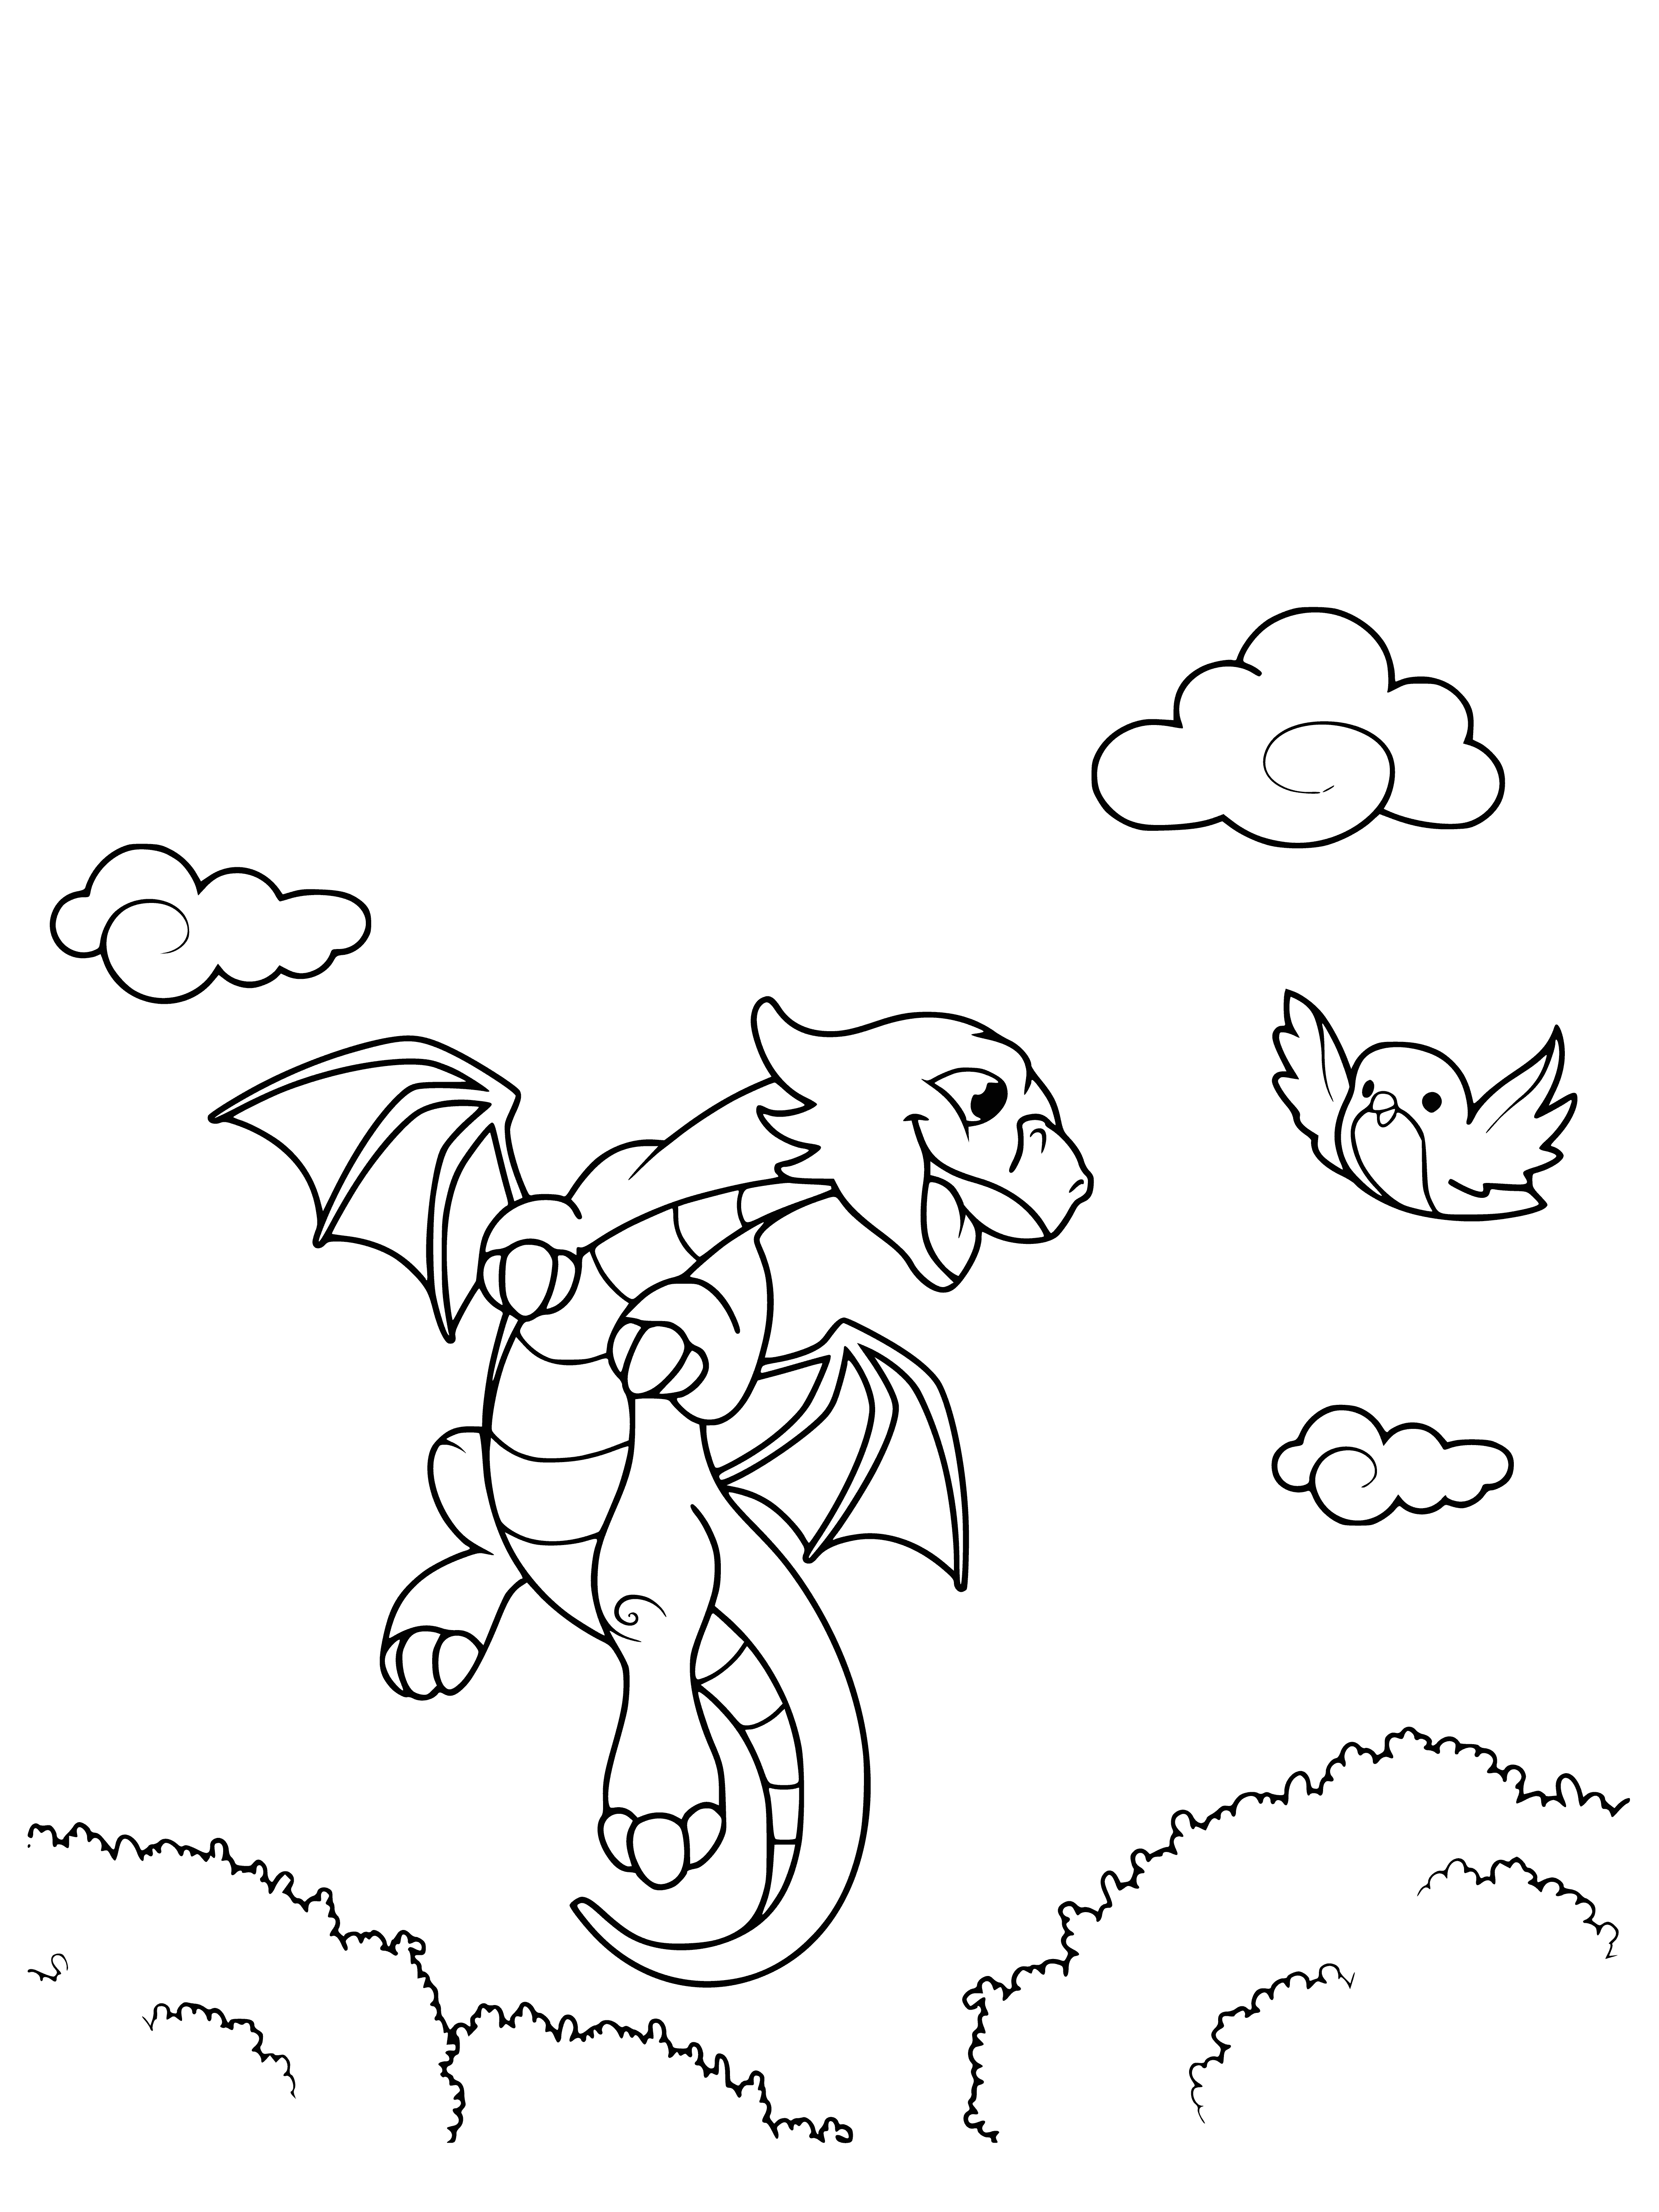 The dragon loves to fly coloring page